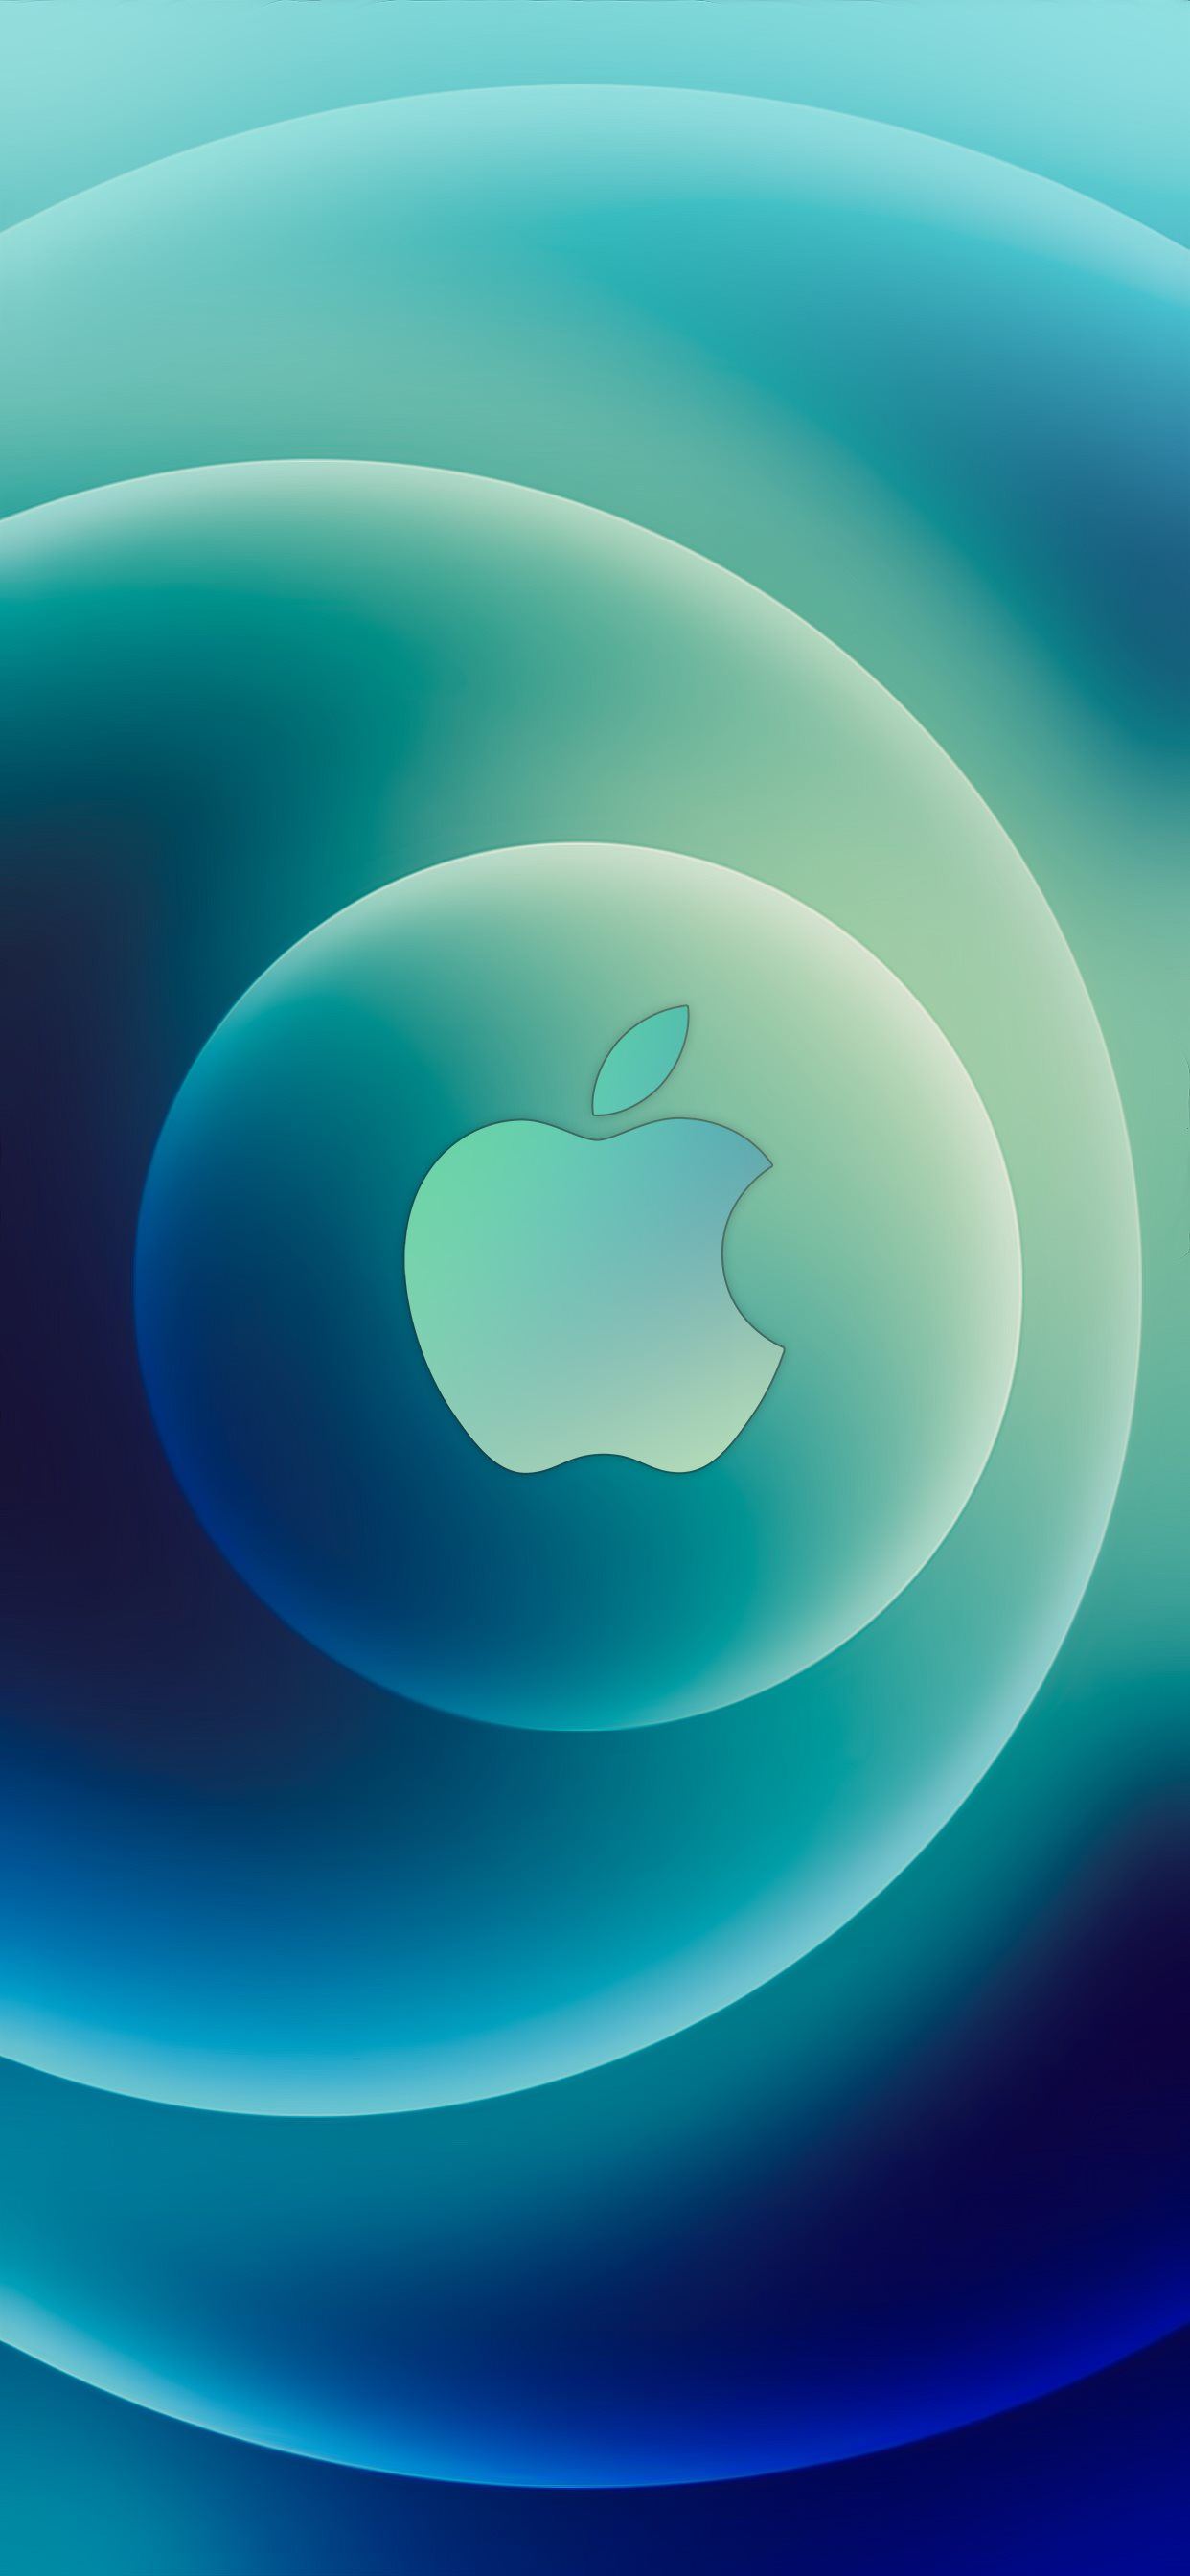 Apple Event 13 Oct Logo Light by AR7 iPhone 11 Wallpaper Free Download